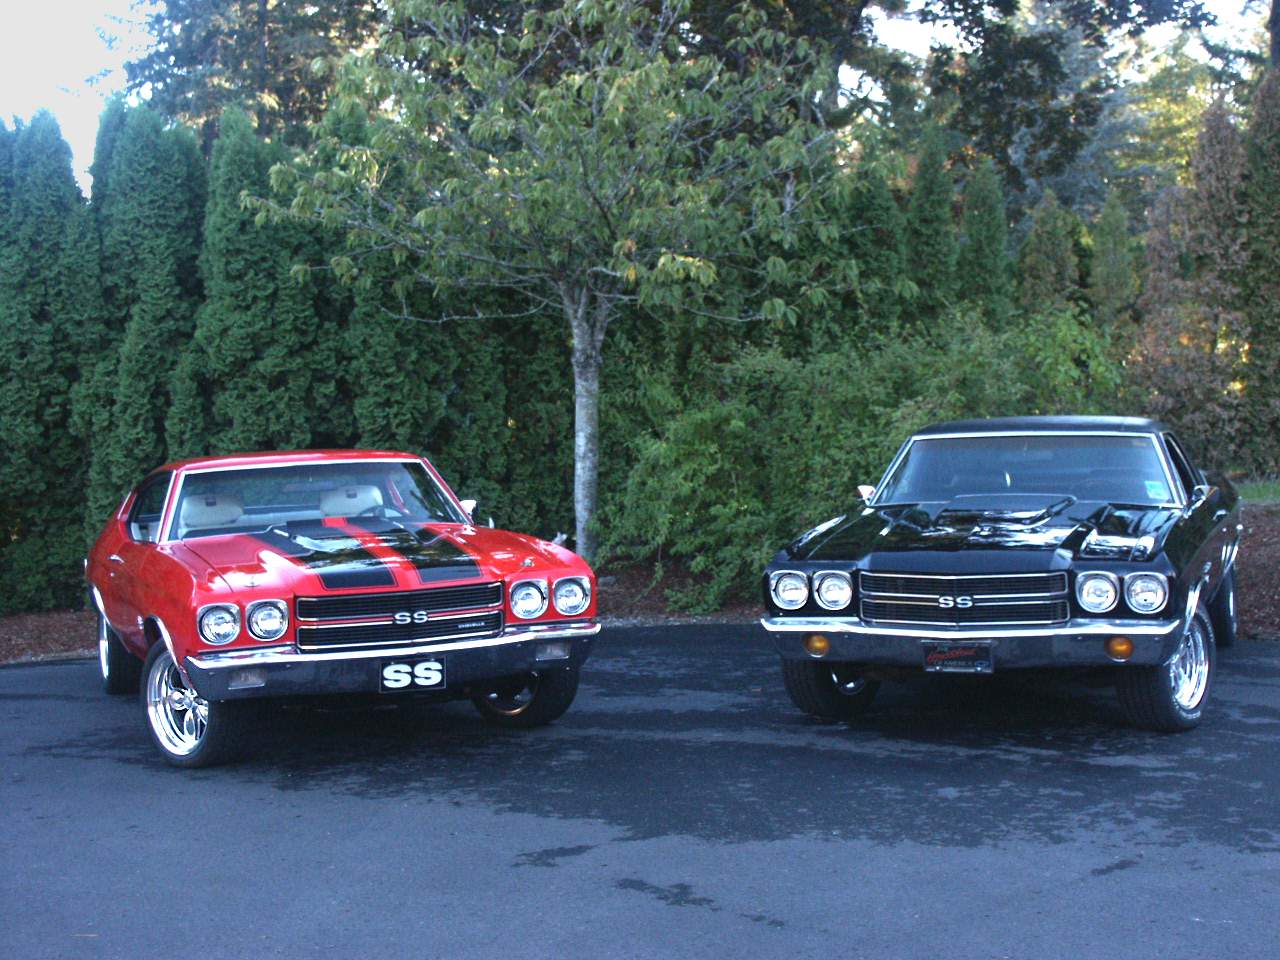 1970 Chevelle & El Camino Photo Backgrounds from Team Chevelle